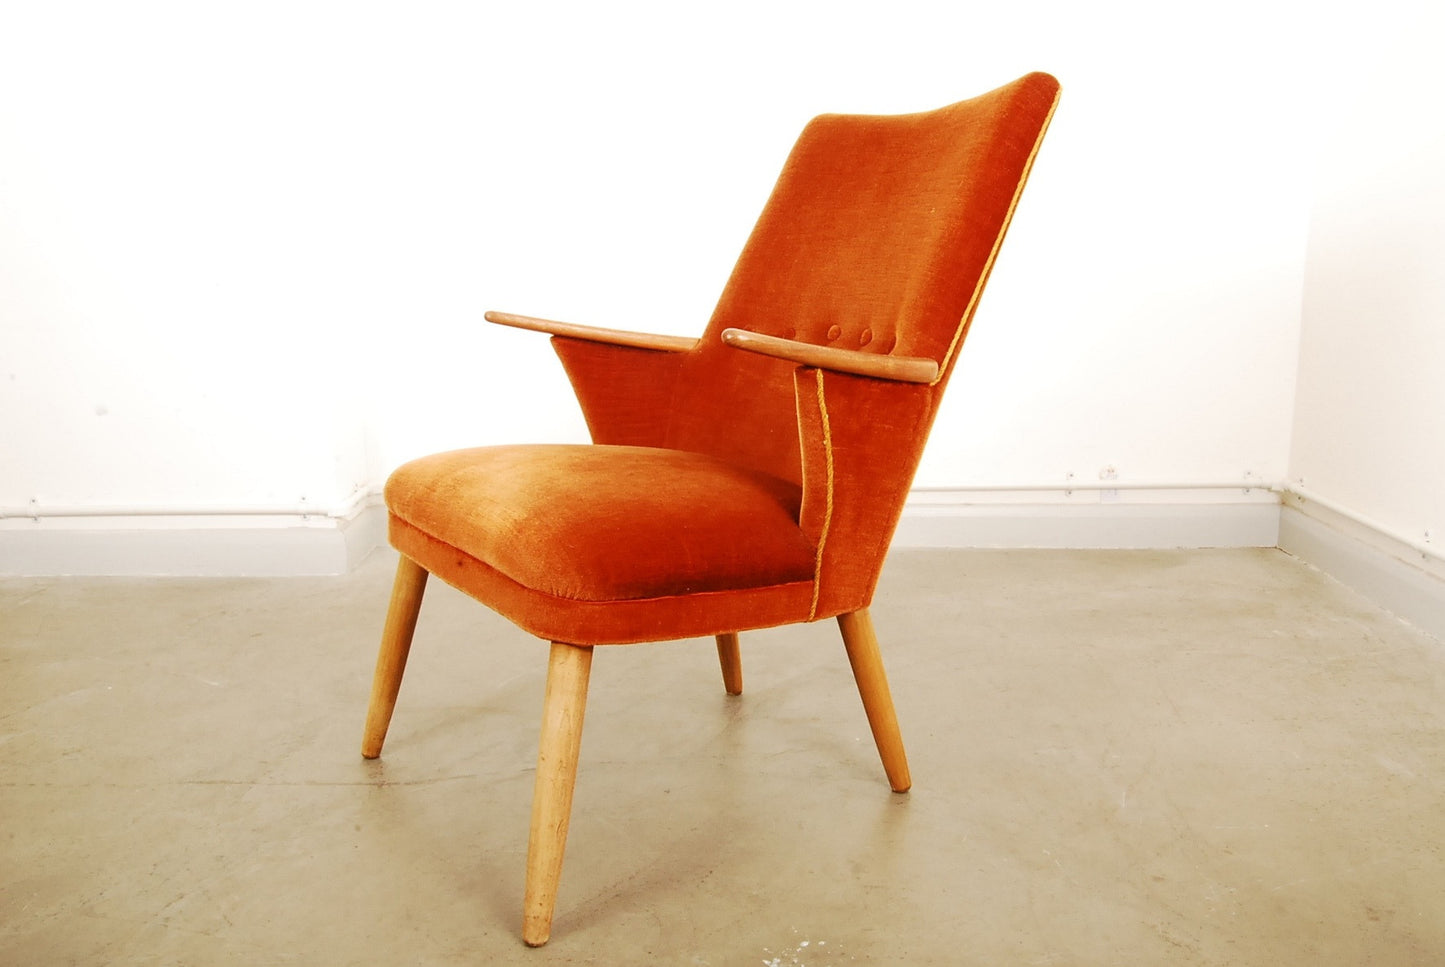 1950s occasional chair with teak arms